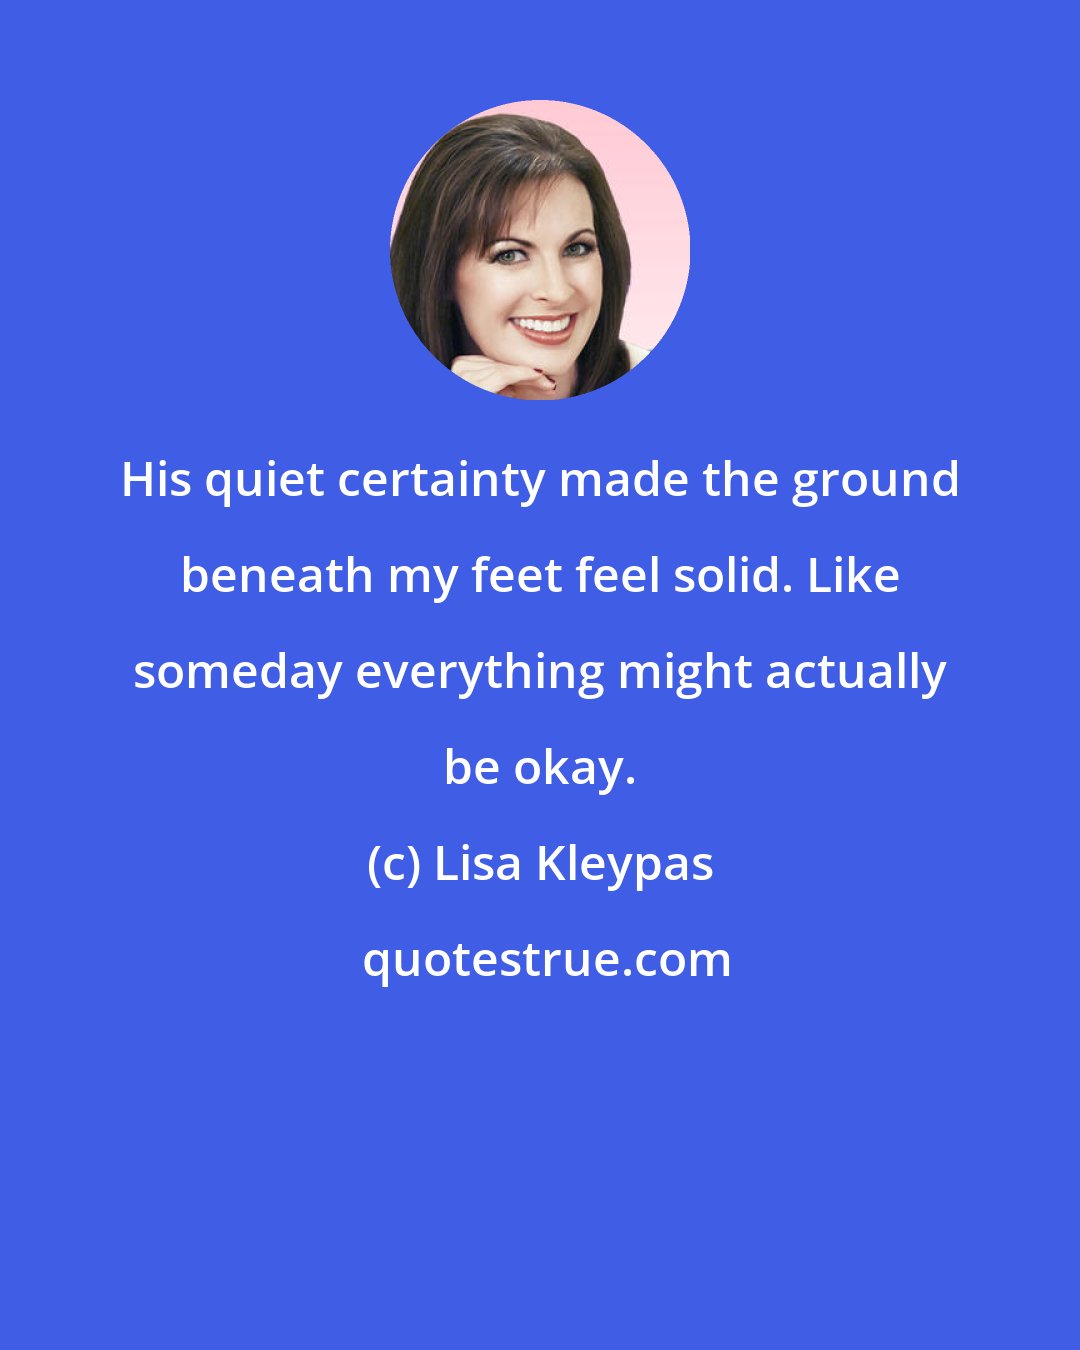 Lisa Kleypas: His quiet certainty made the ground beneath my feet feel solid. Like someday everything might actually be okay.